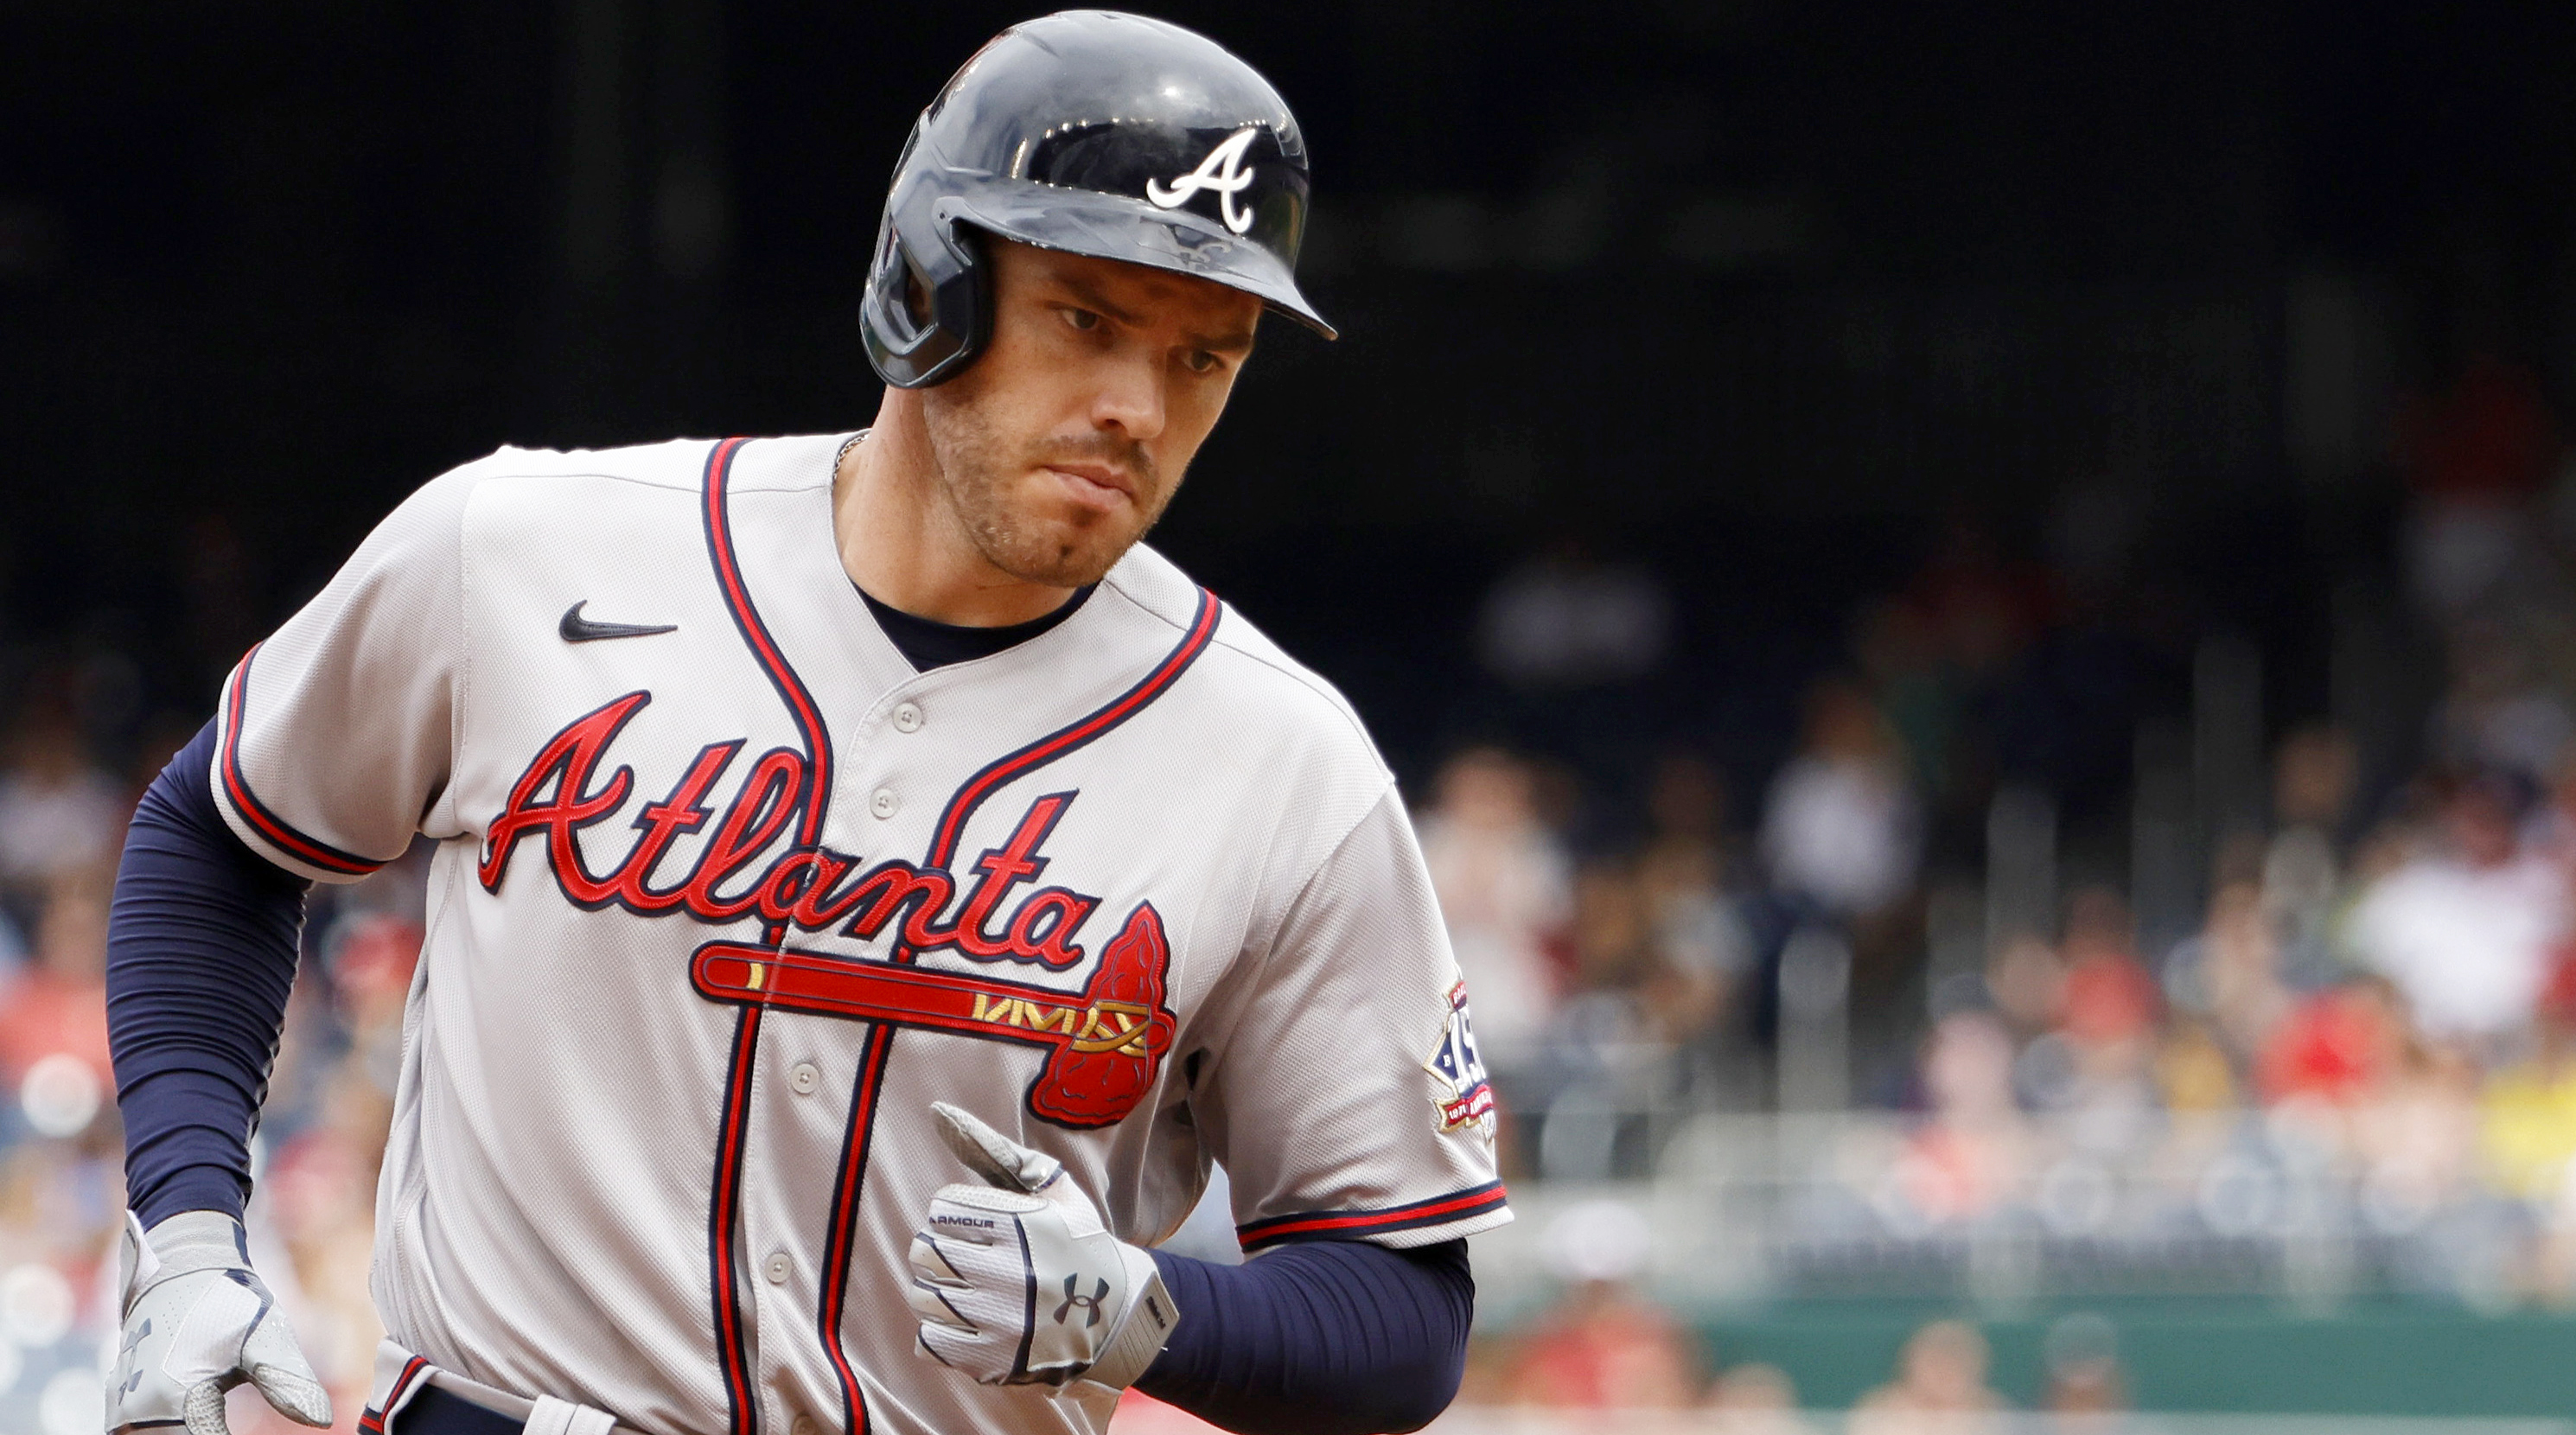 The Braves are sitting pretty, but much depends on Freddie Freeman